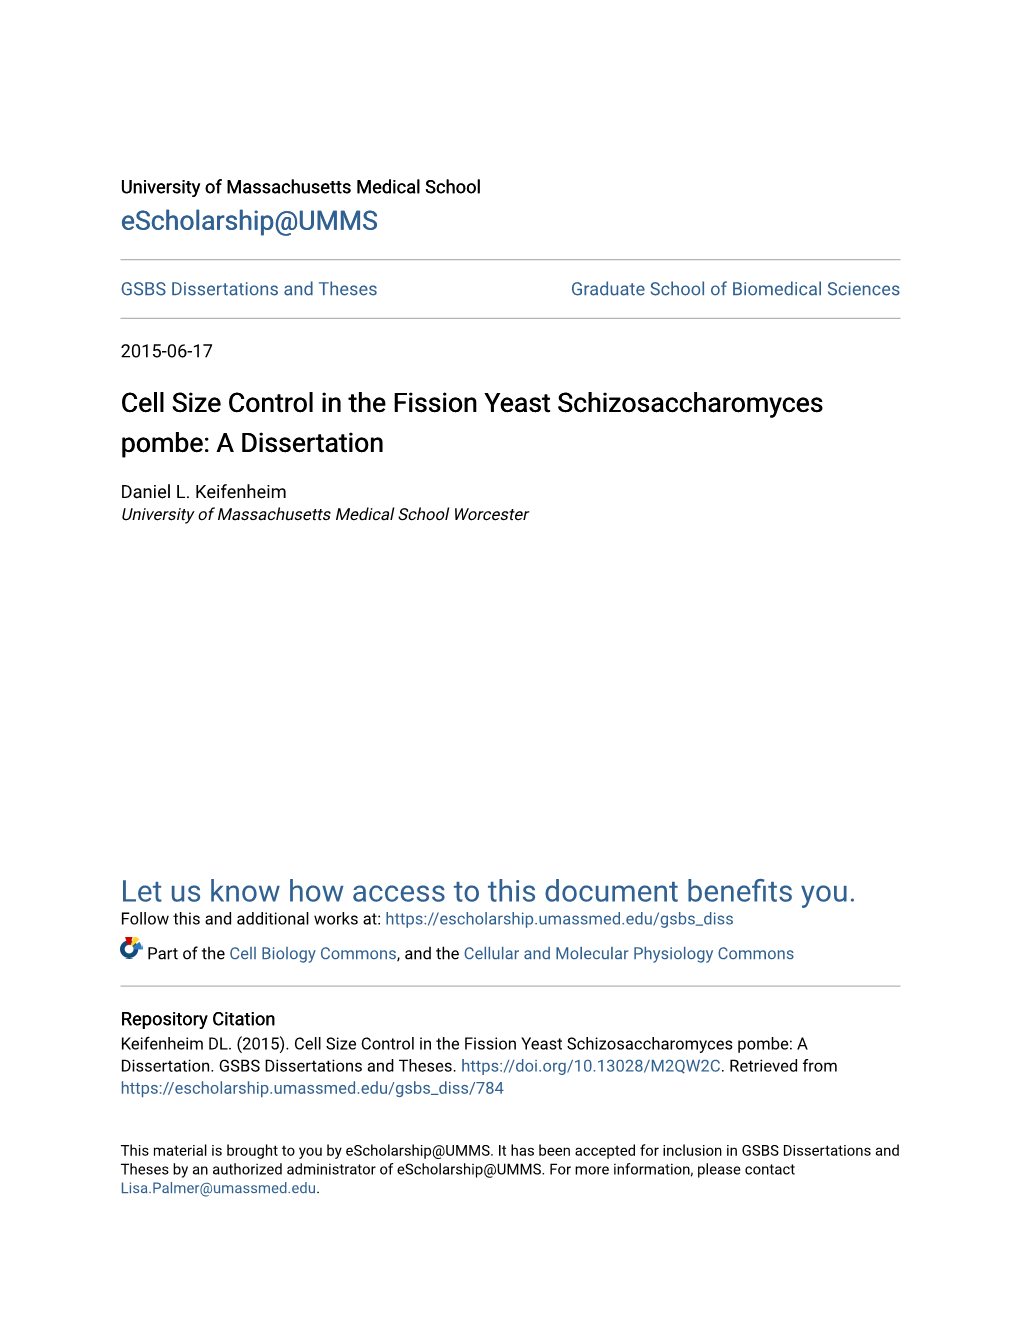 Cell Size Control in the Fission Yeast Schizosaccharomyces Pombe: a Dissertation